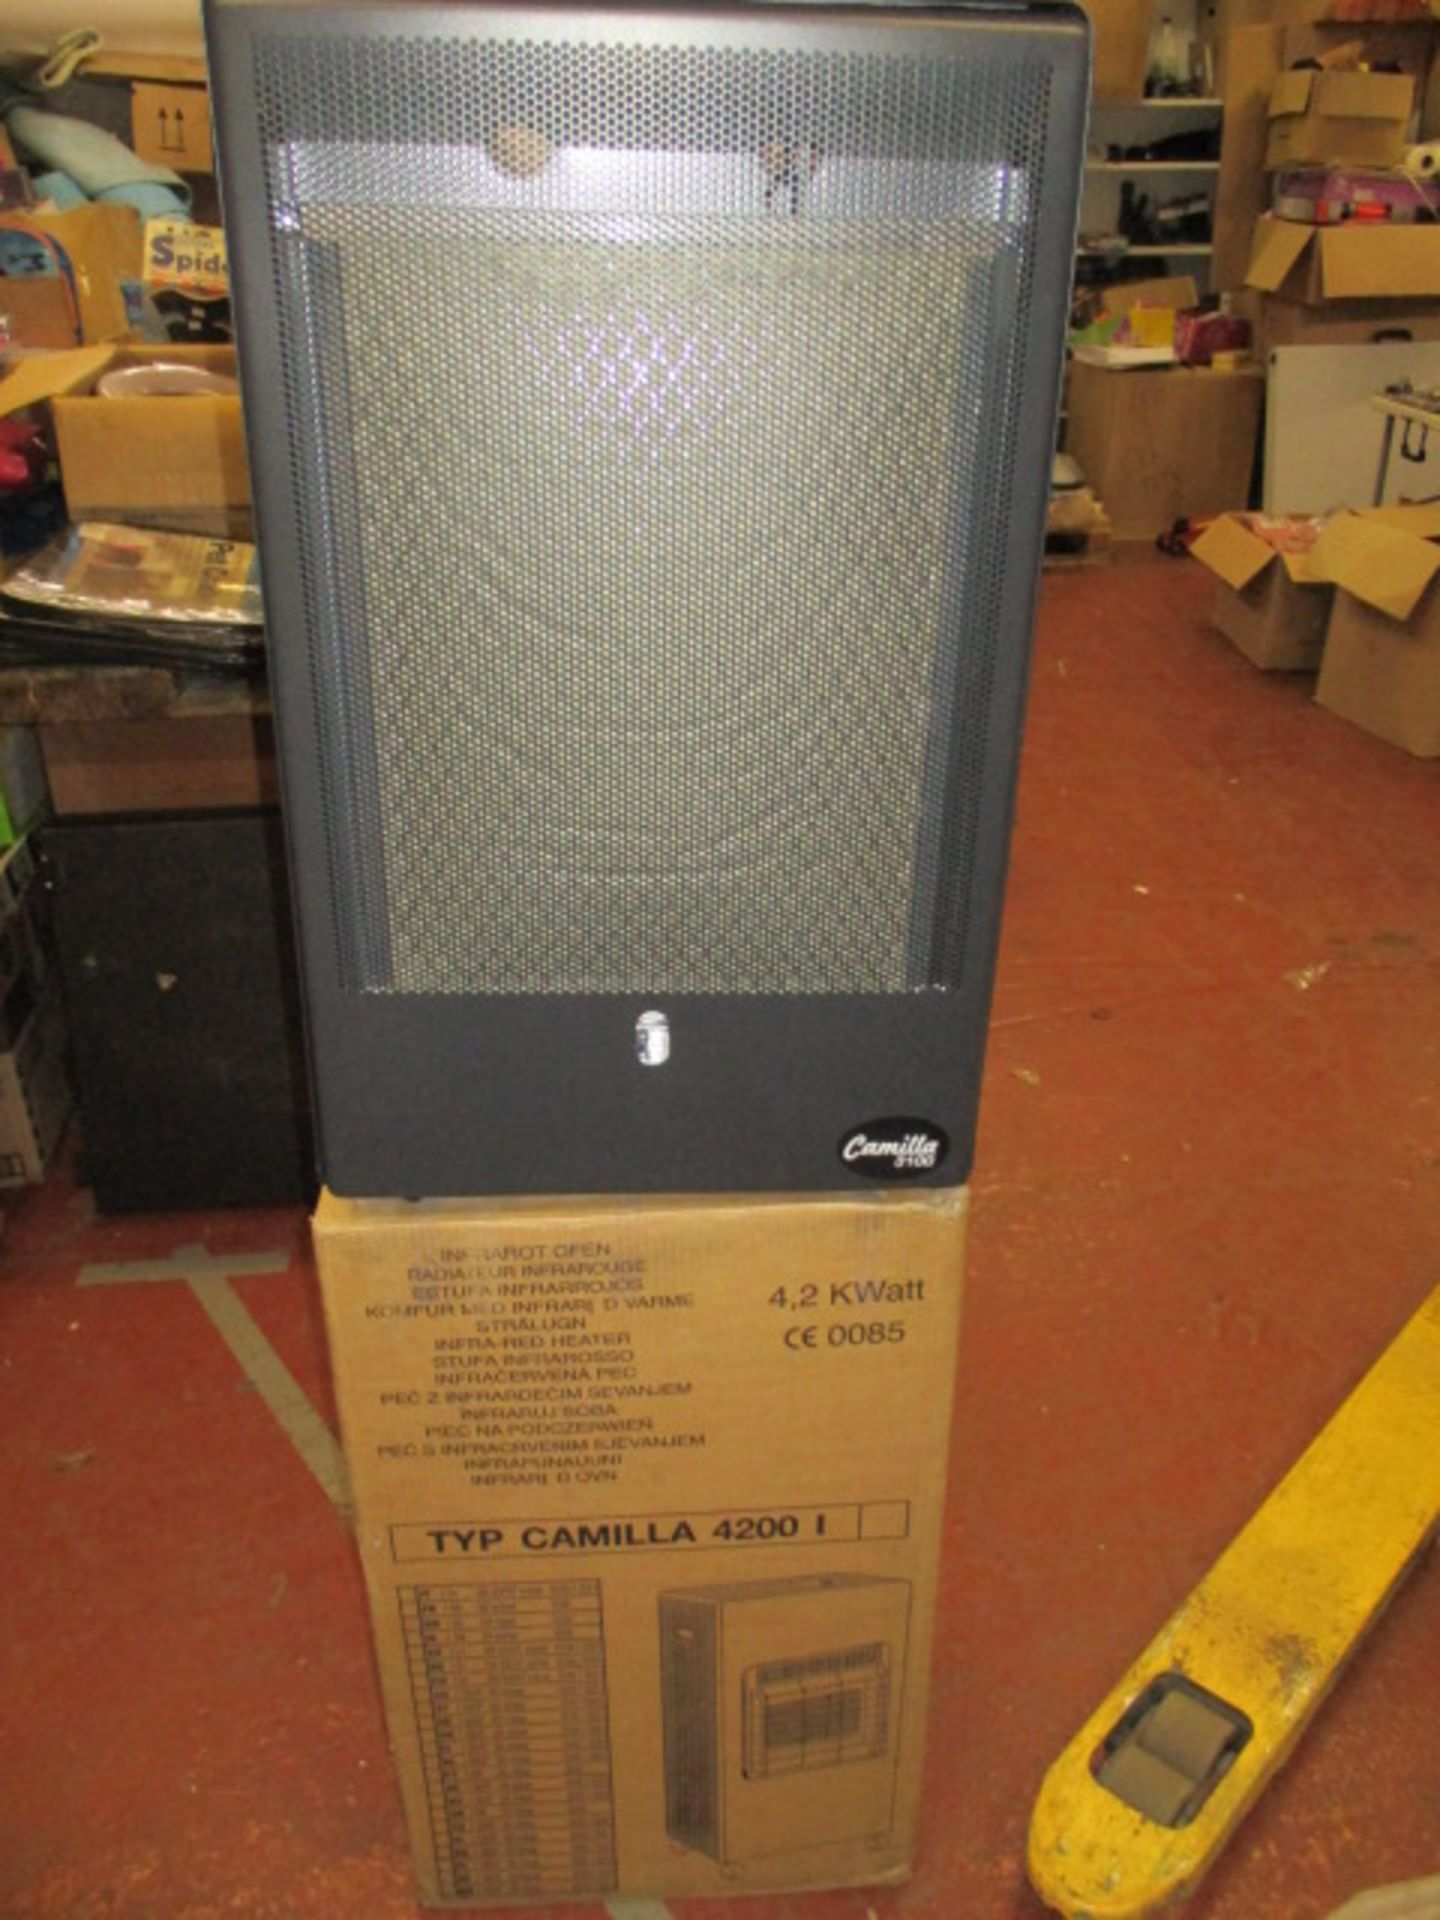 Camilla 3100 Catalytic gas heater brand new in box slight dent on inner base of unit RRP £119.99 - Image 5 of 7